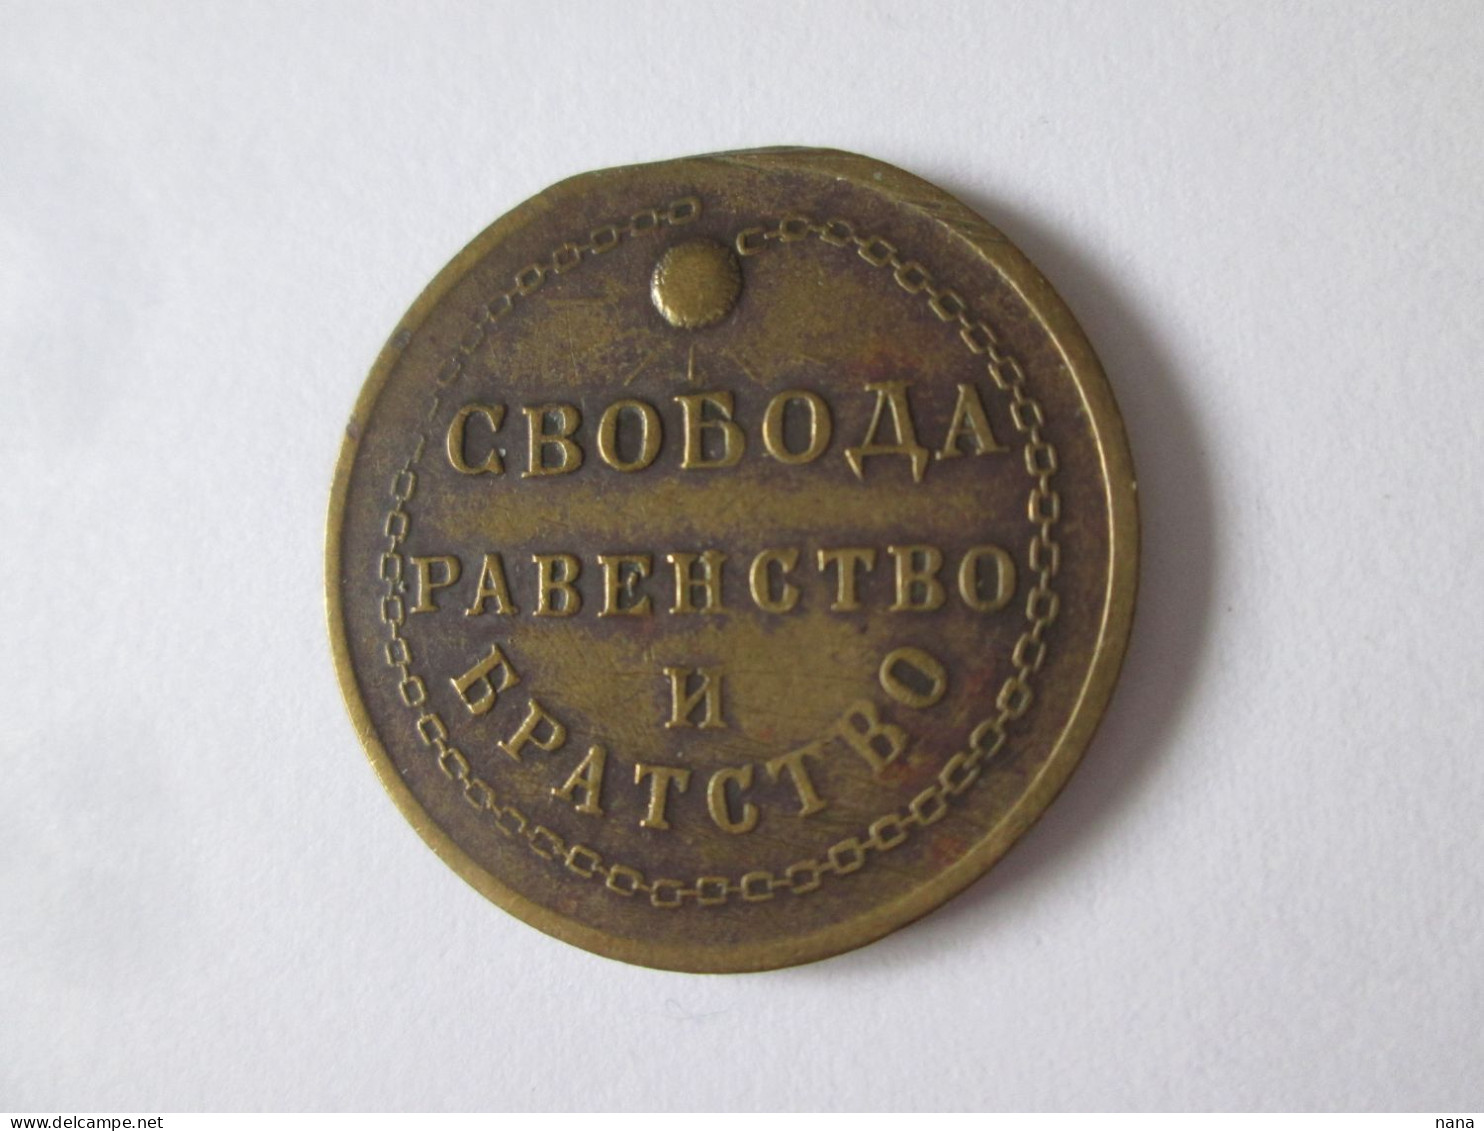 Rare! 1917 Russie Medaille Provis.du Gouvern.Kerensky/1917 Russia Provisional Kerensky Government Medal - Rusland